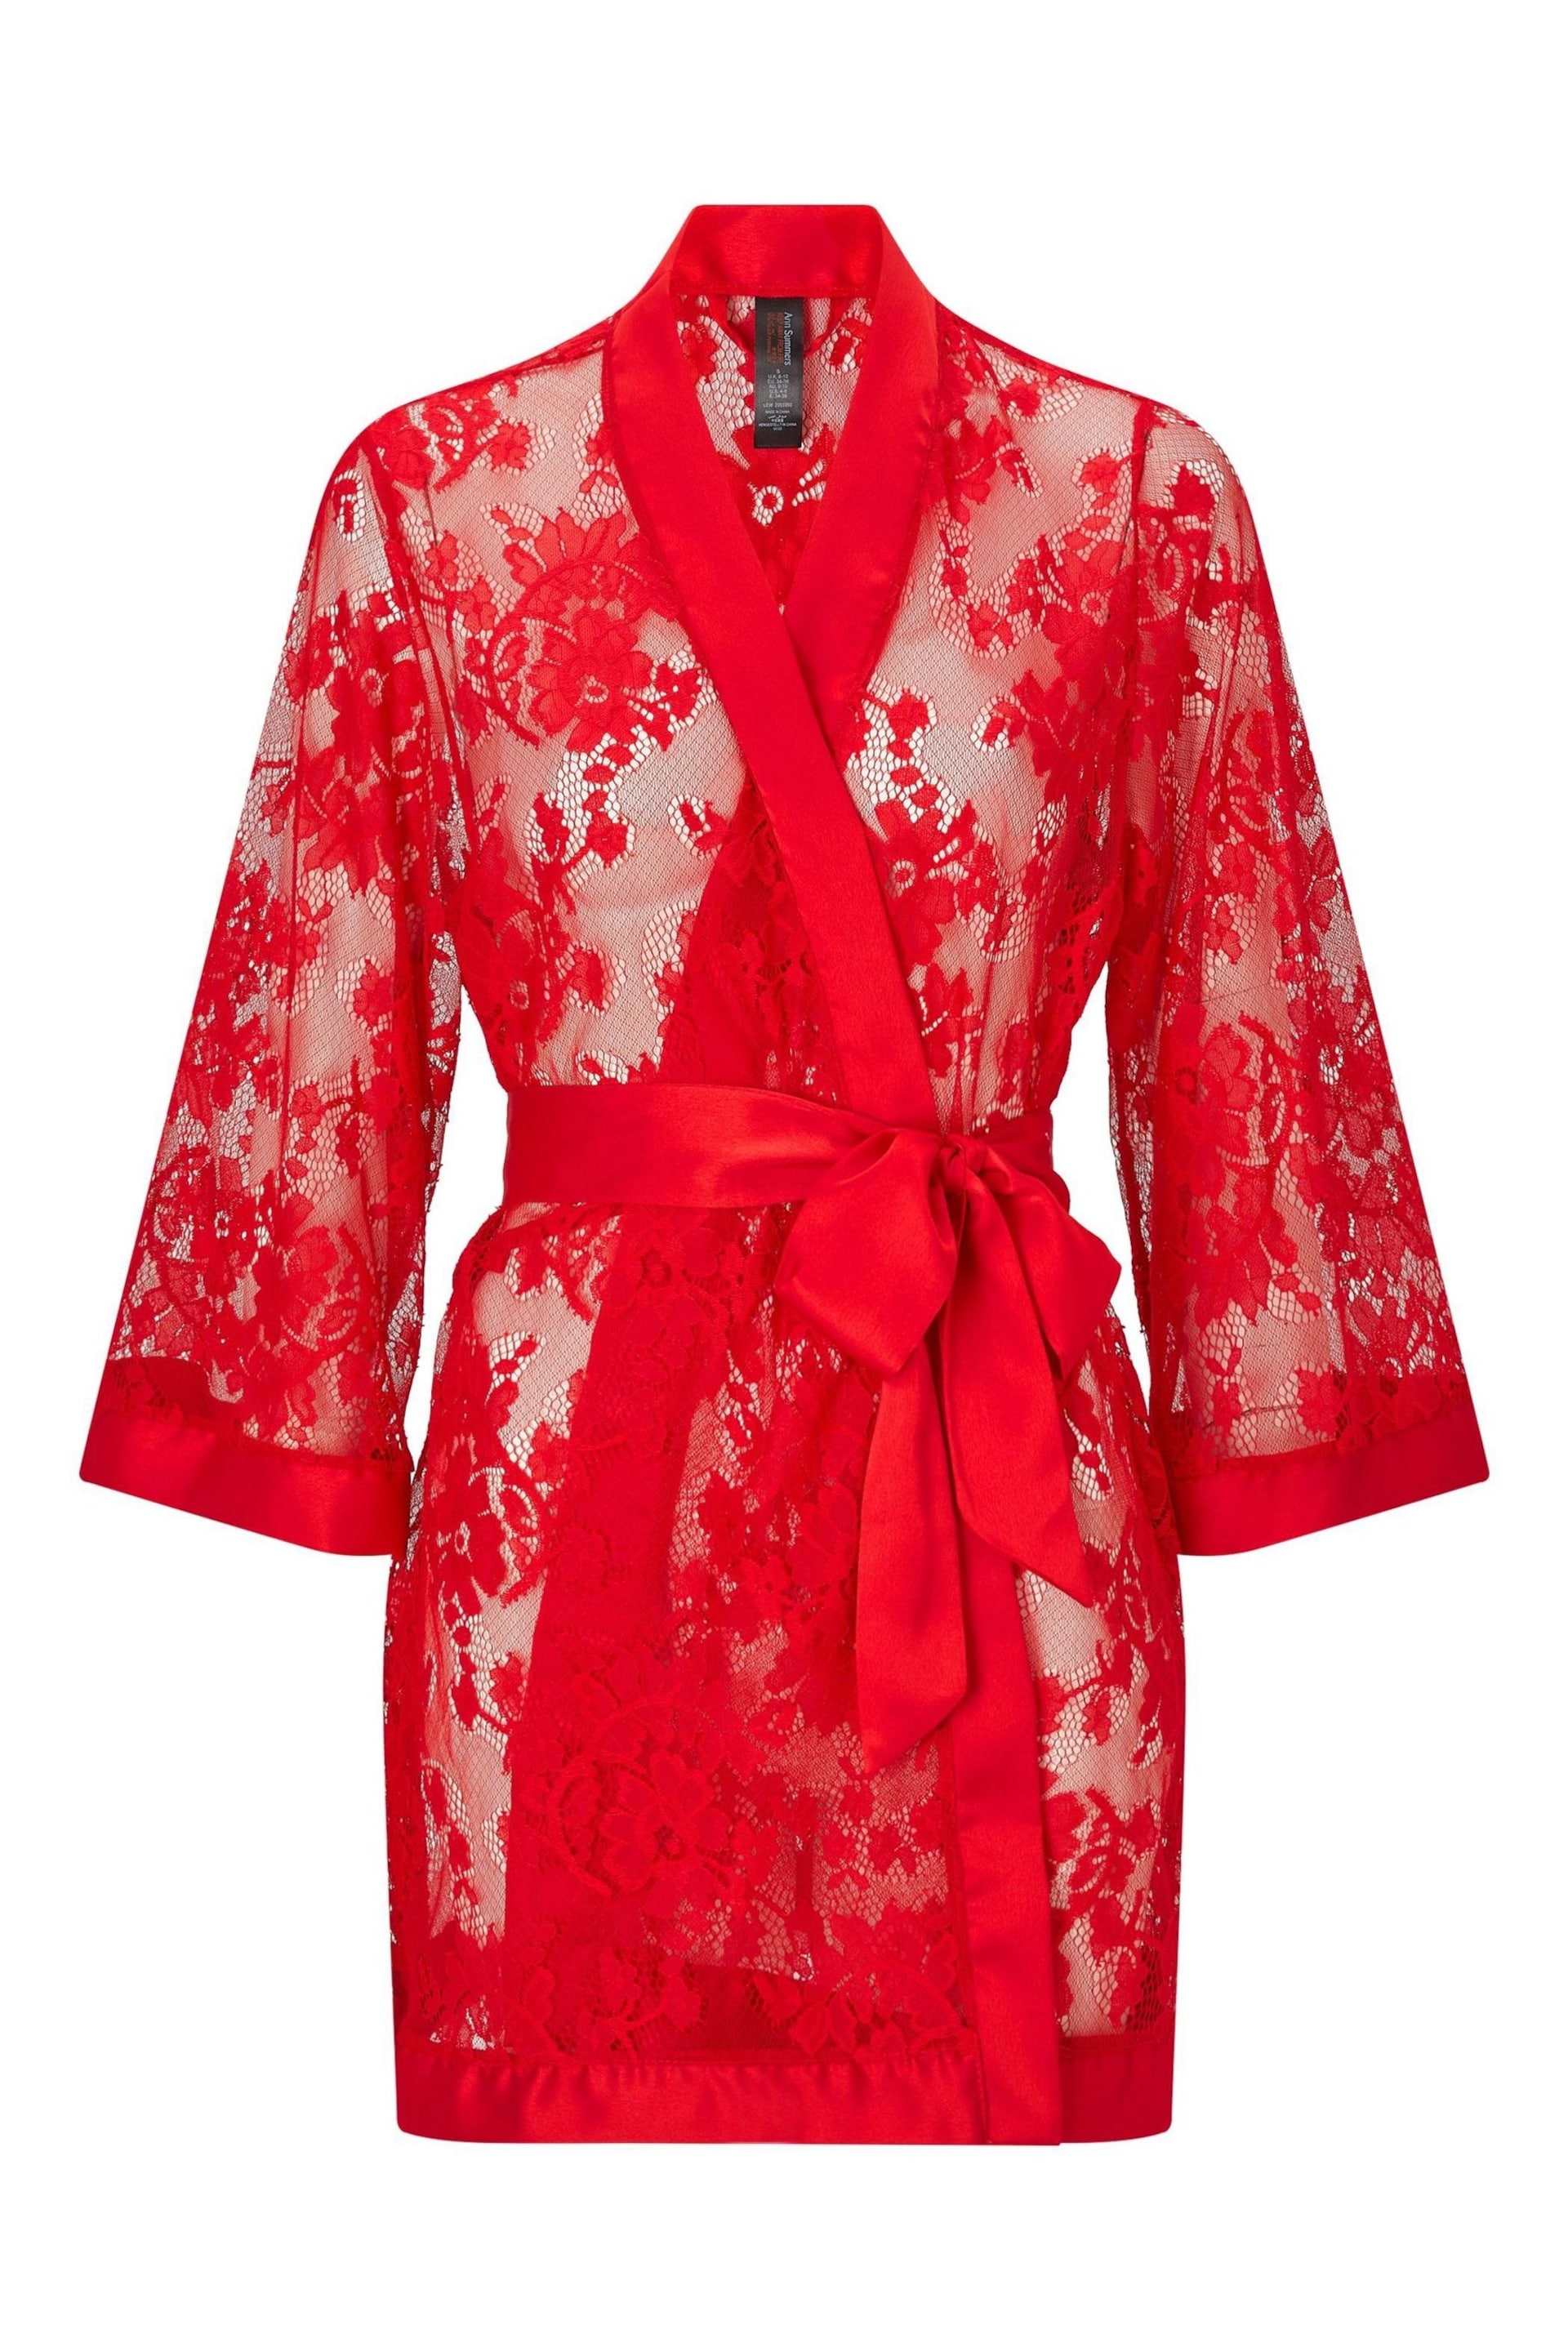 Ann Summers Red The Dark Hours Robe Dressing Gown - Image 4 of 4